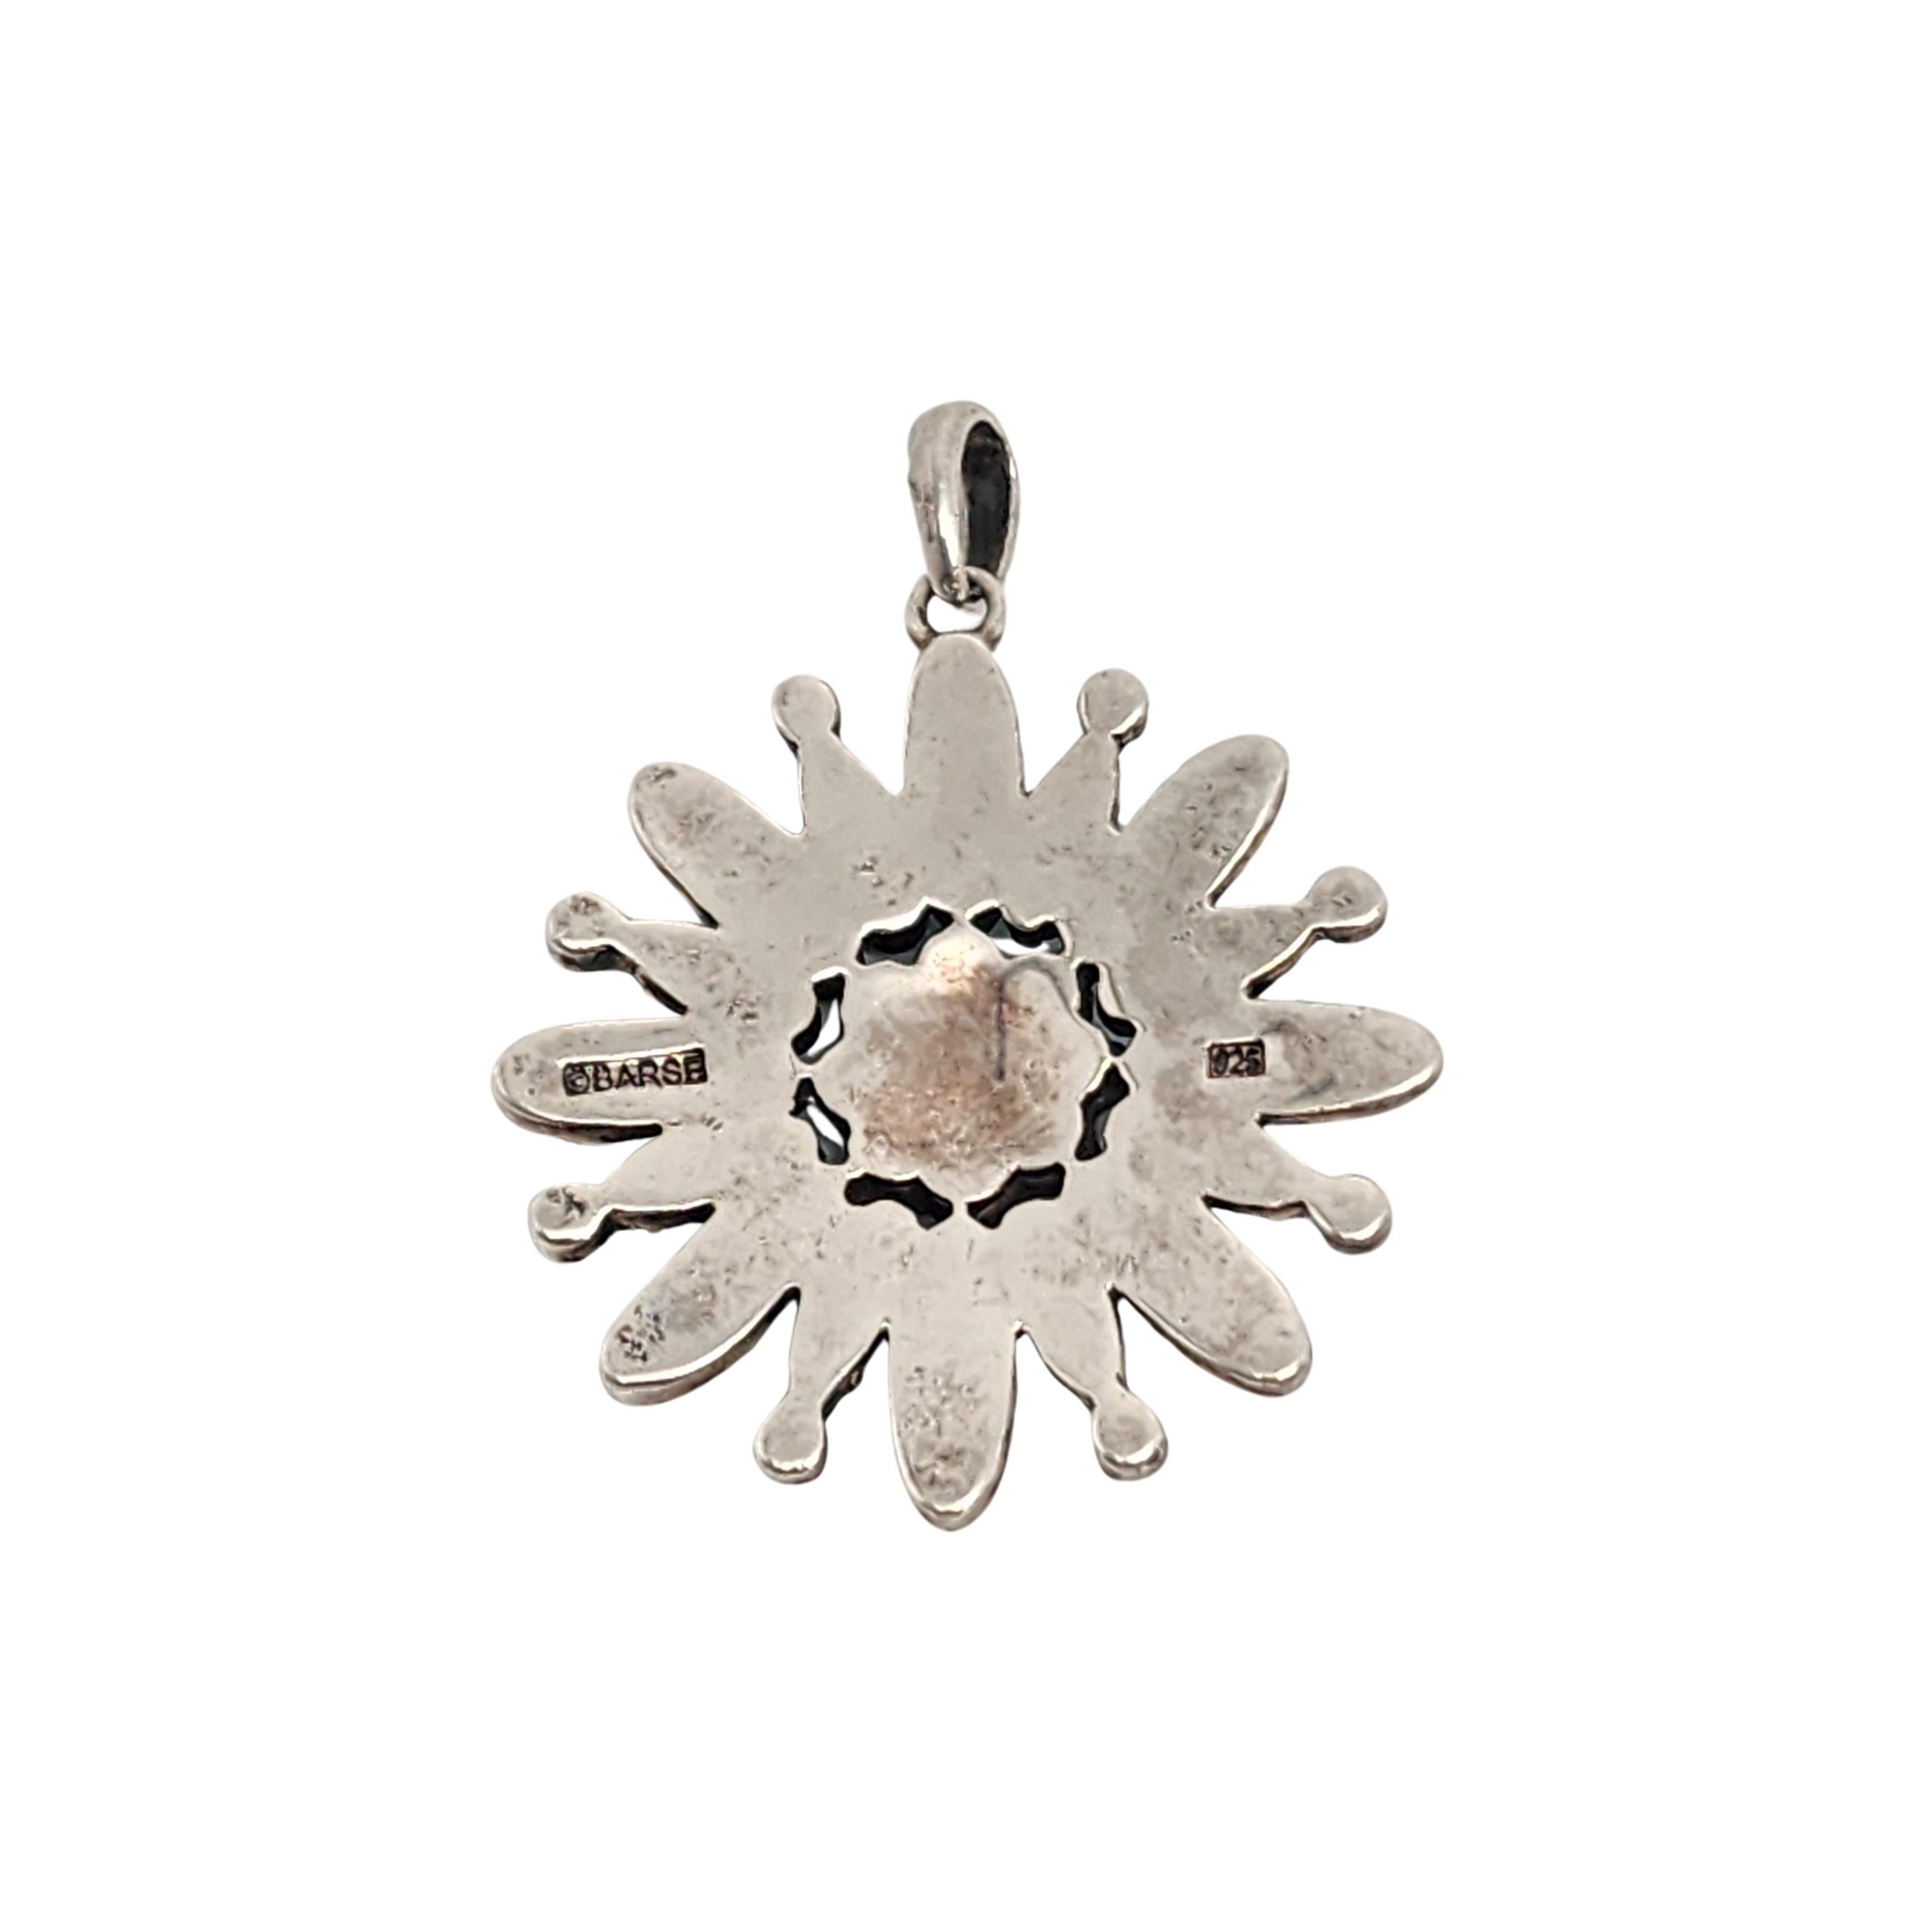 Barse sterling silver turquoise flower pendant

This flower shaped pendant features oval bezel set turquoise petals accented with light blue gemstones.

Weighs approx 18.8g, 12.1dwt

Measures approx 2